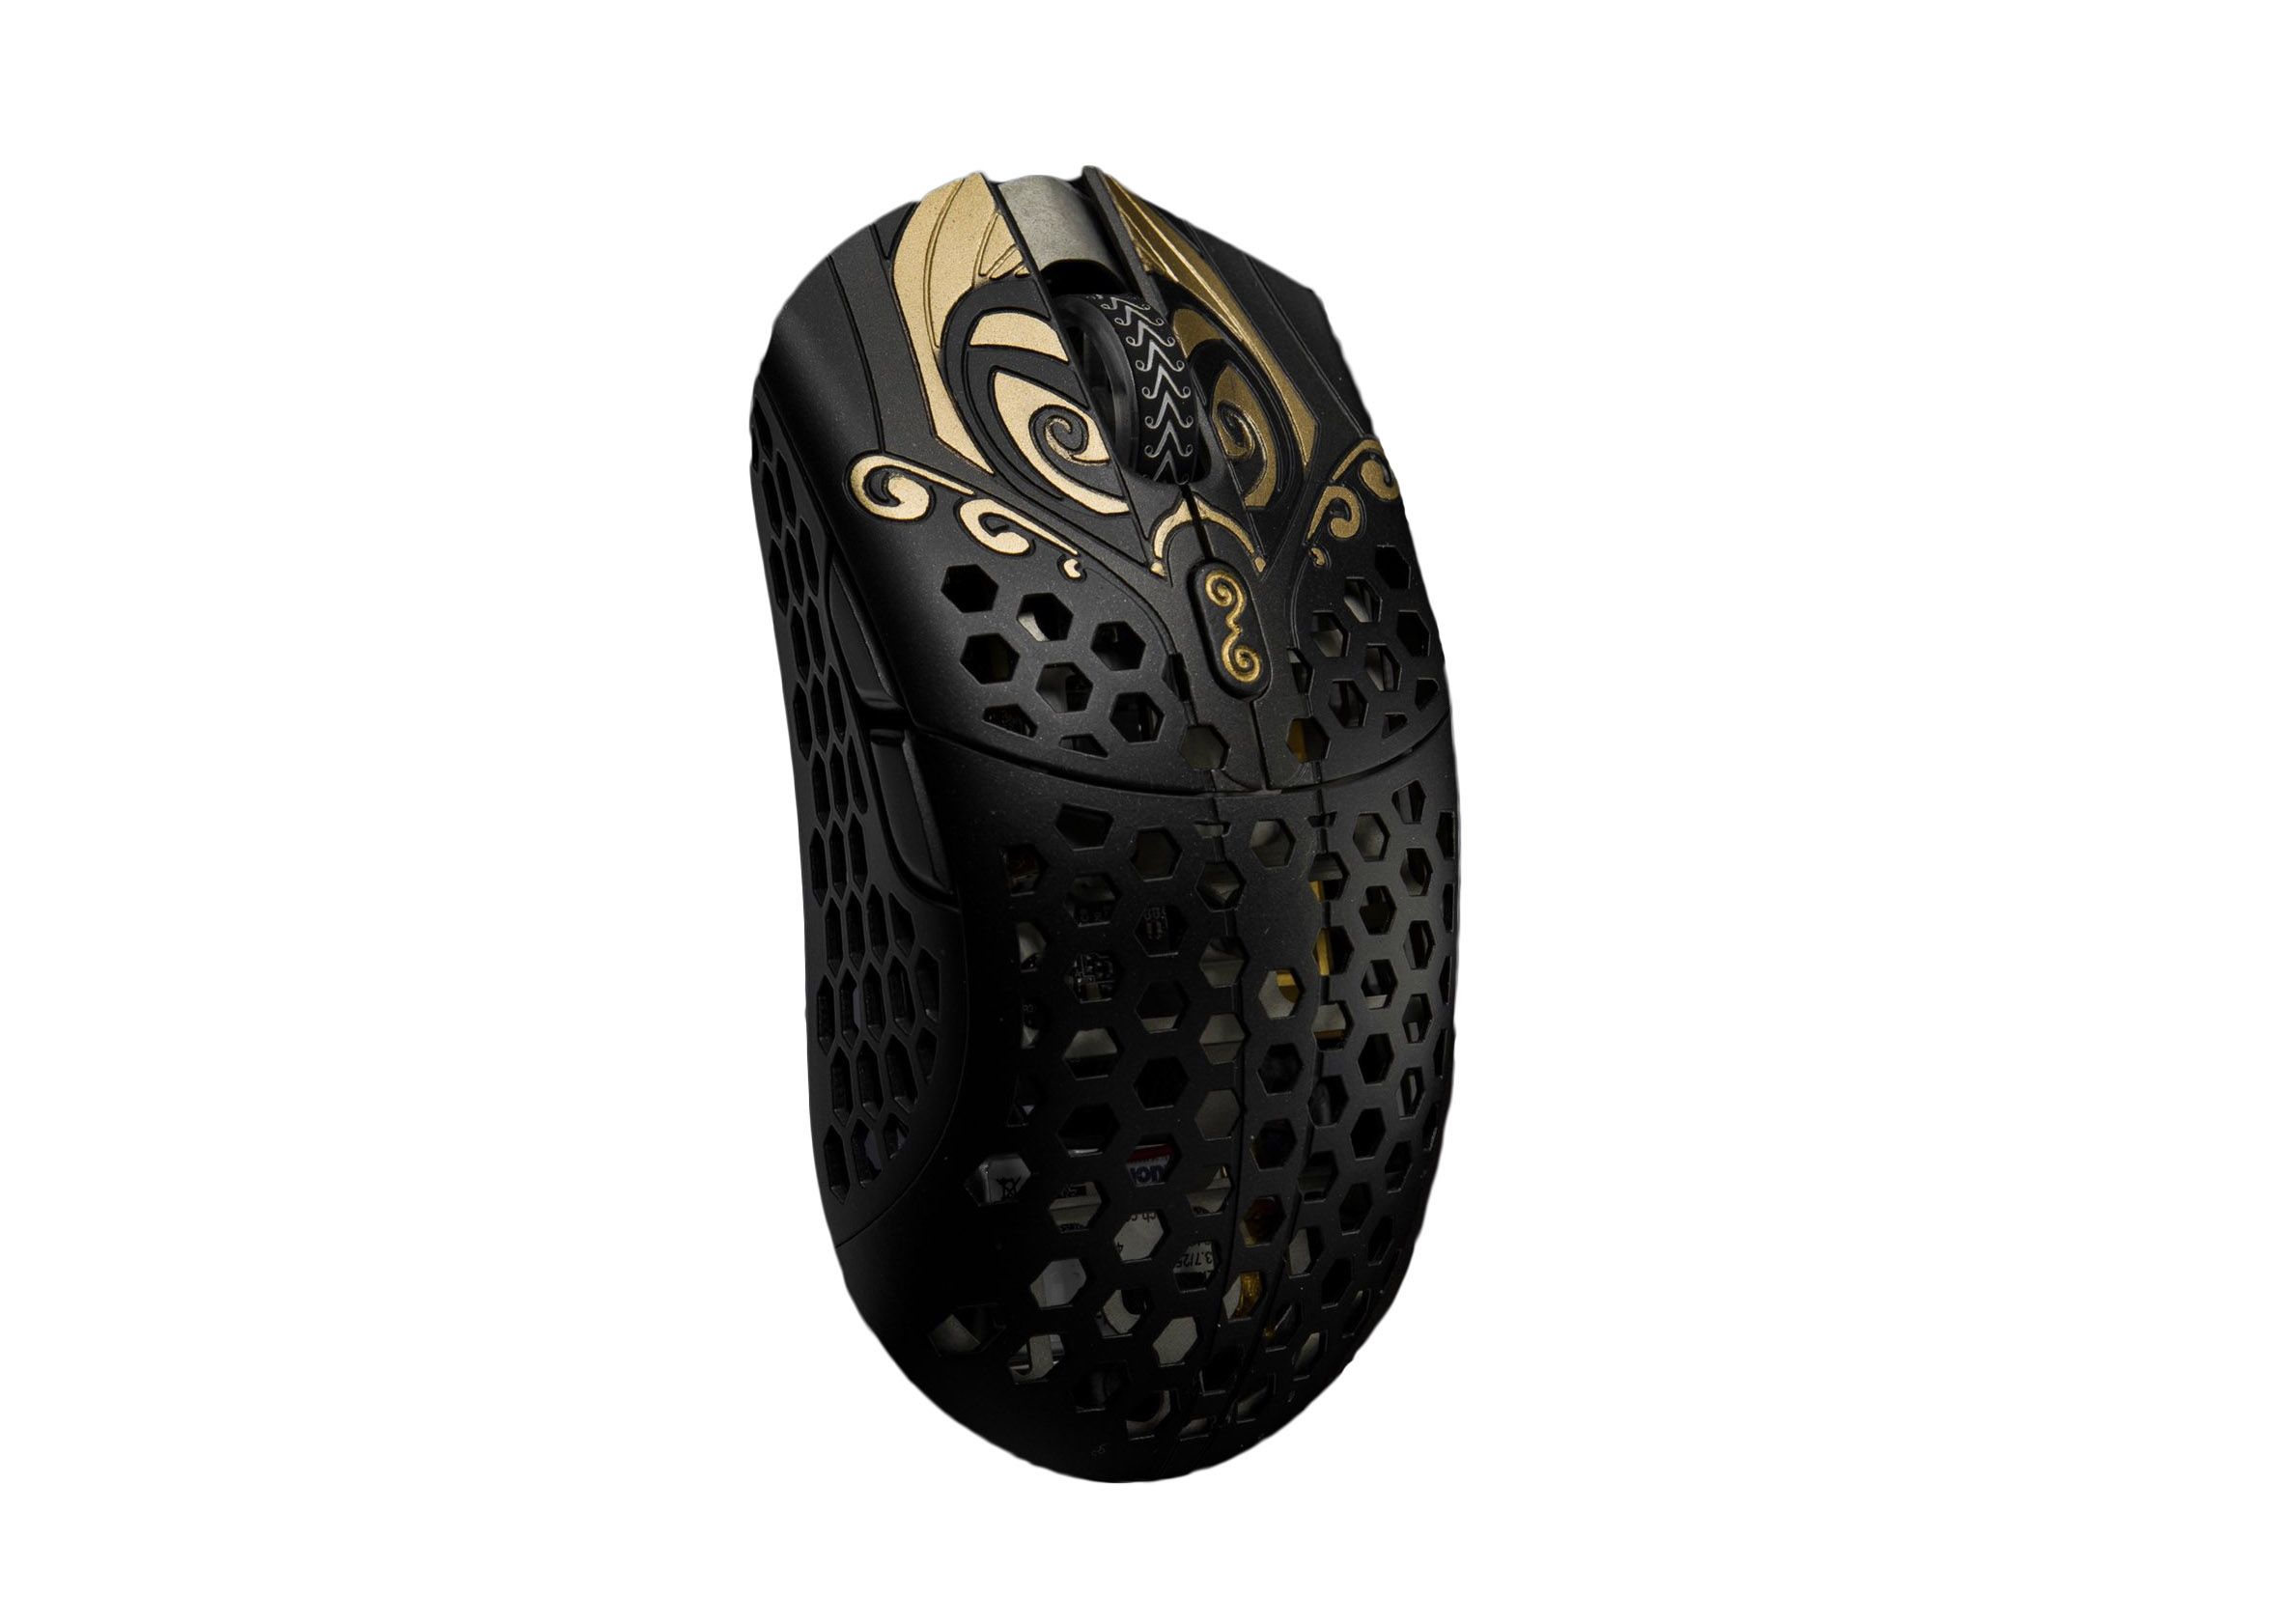 Finalmouse starlight-12-